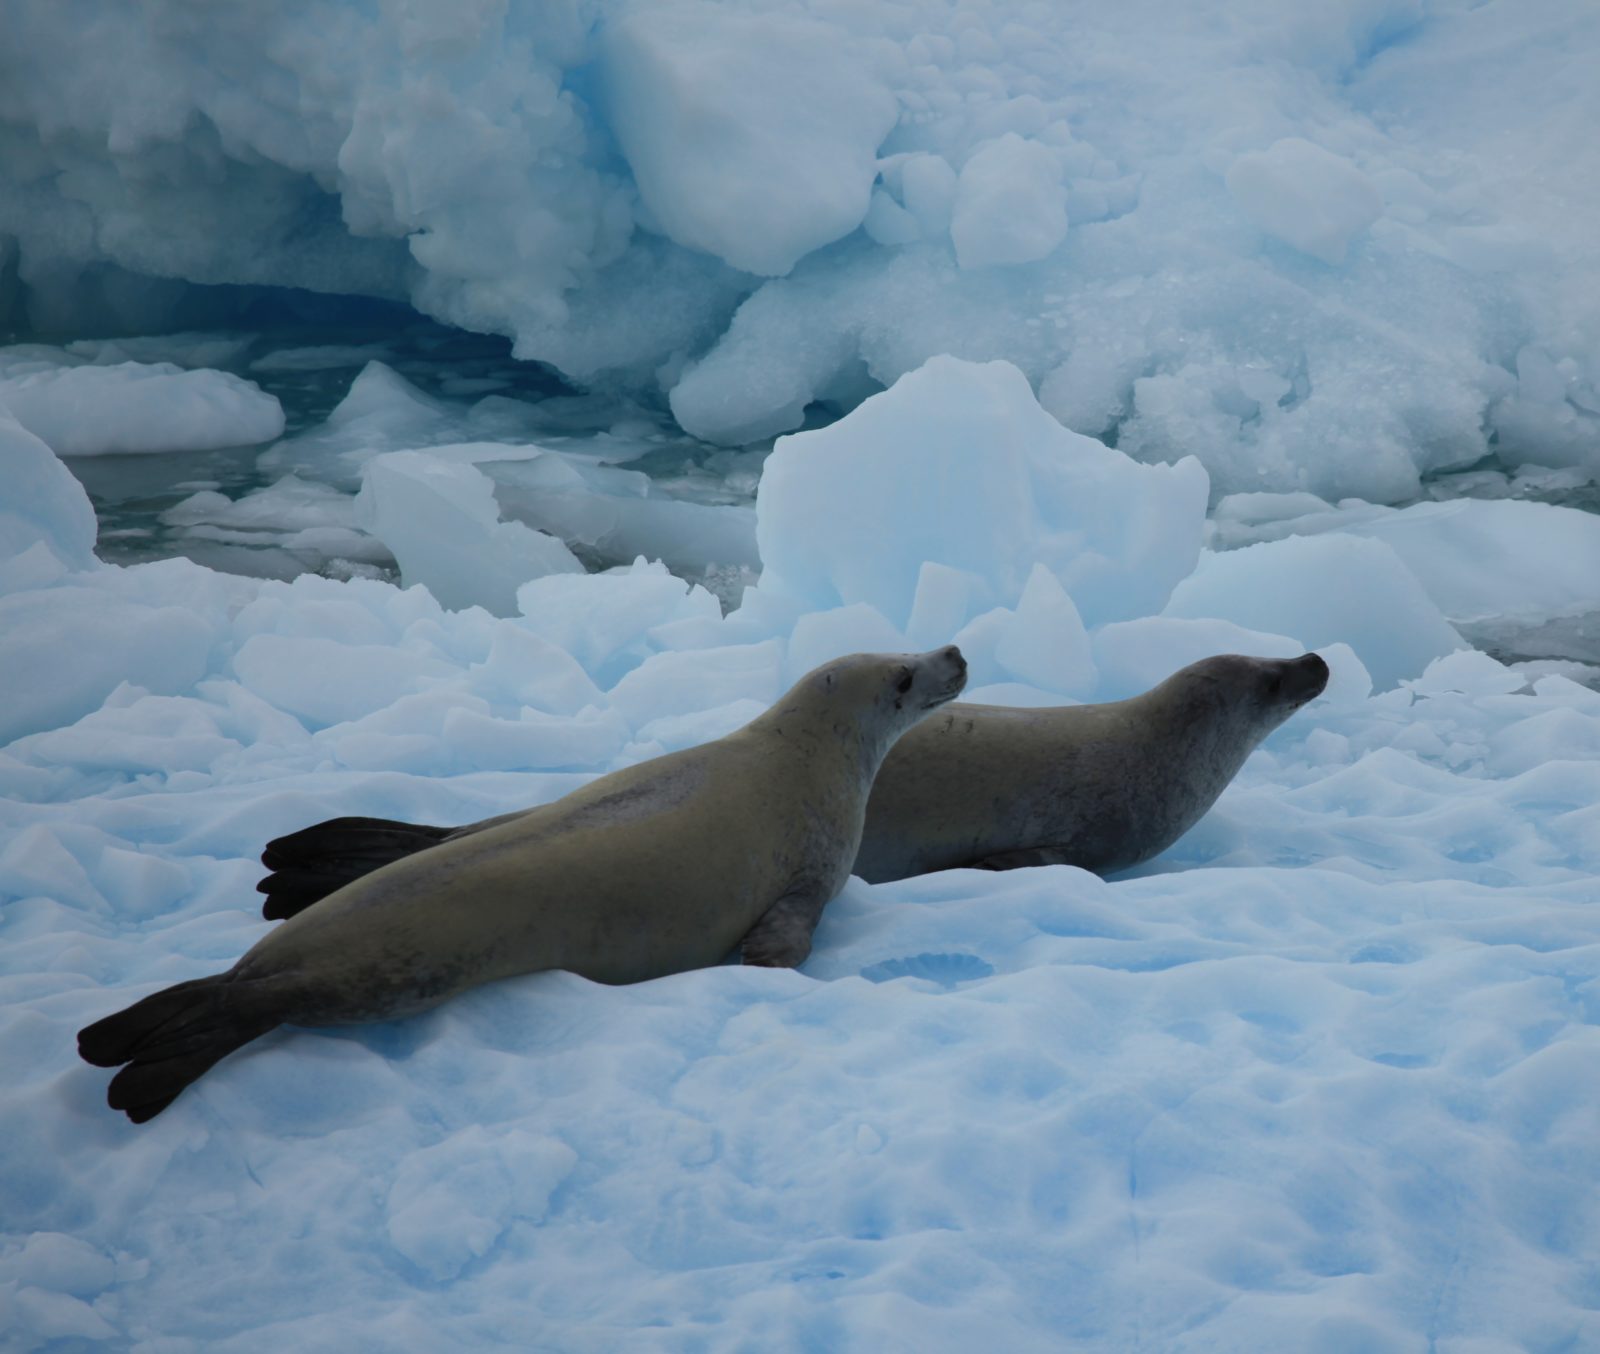 Crabeater Seals in the Lemaire Channel, Antarctica